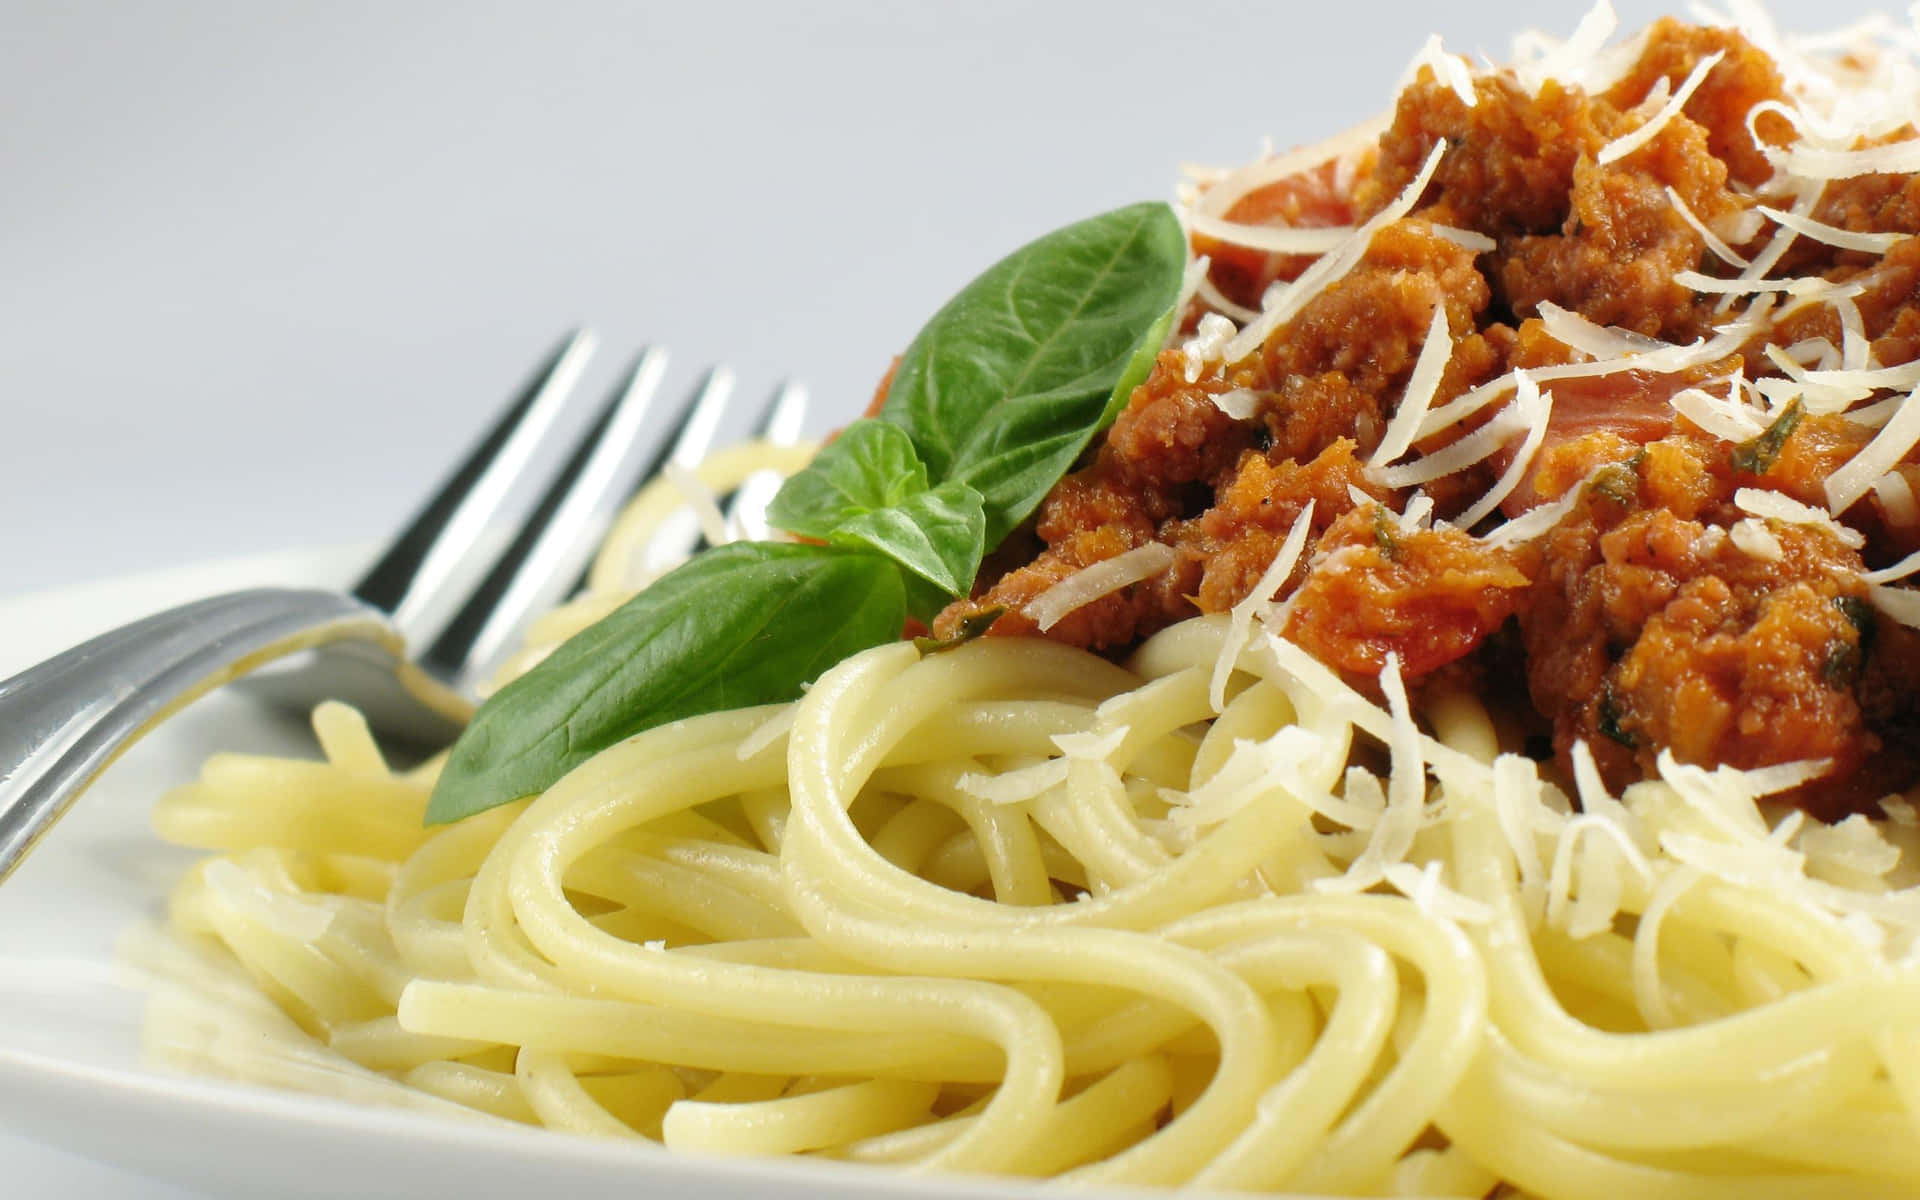 A Plate Of Spaghetti With Meat Sauce And Basil